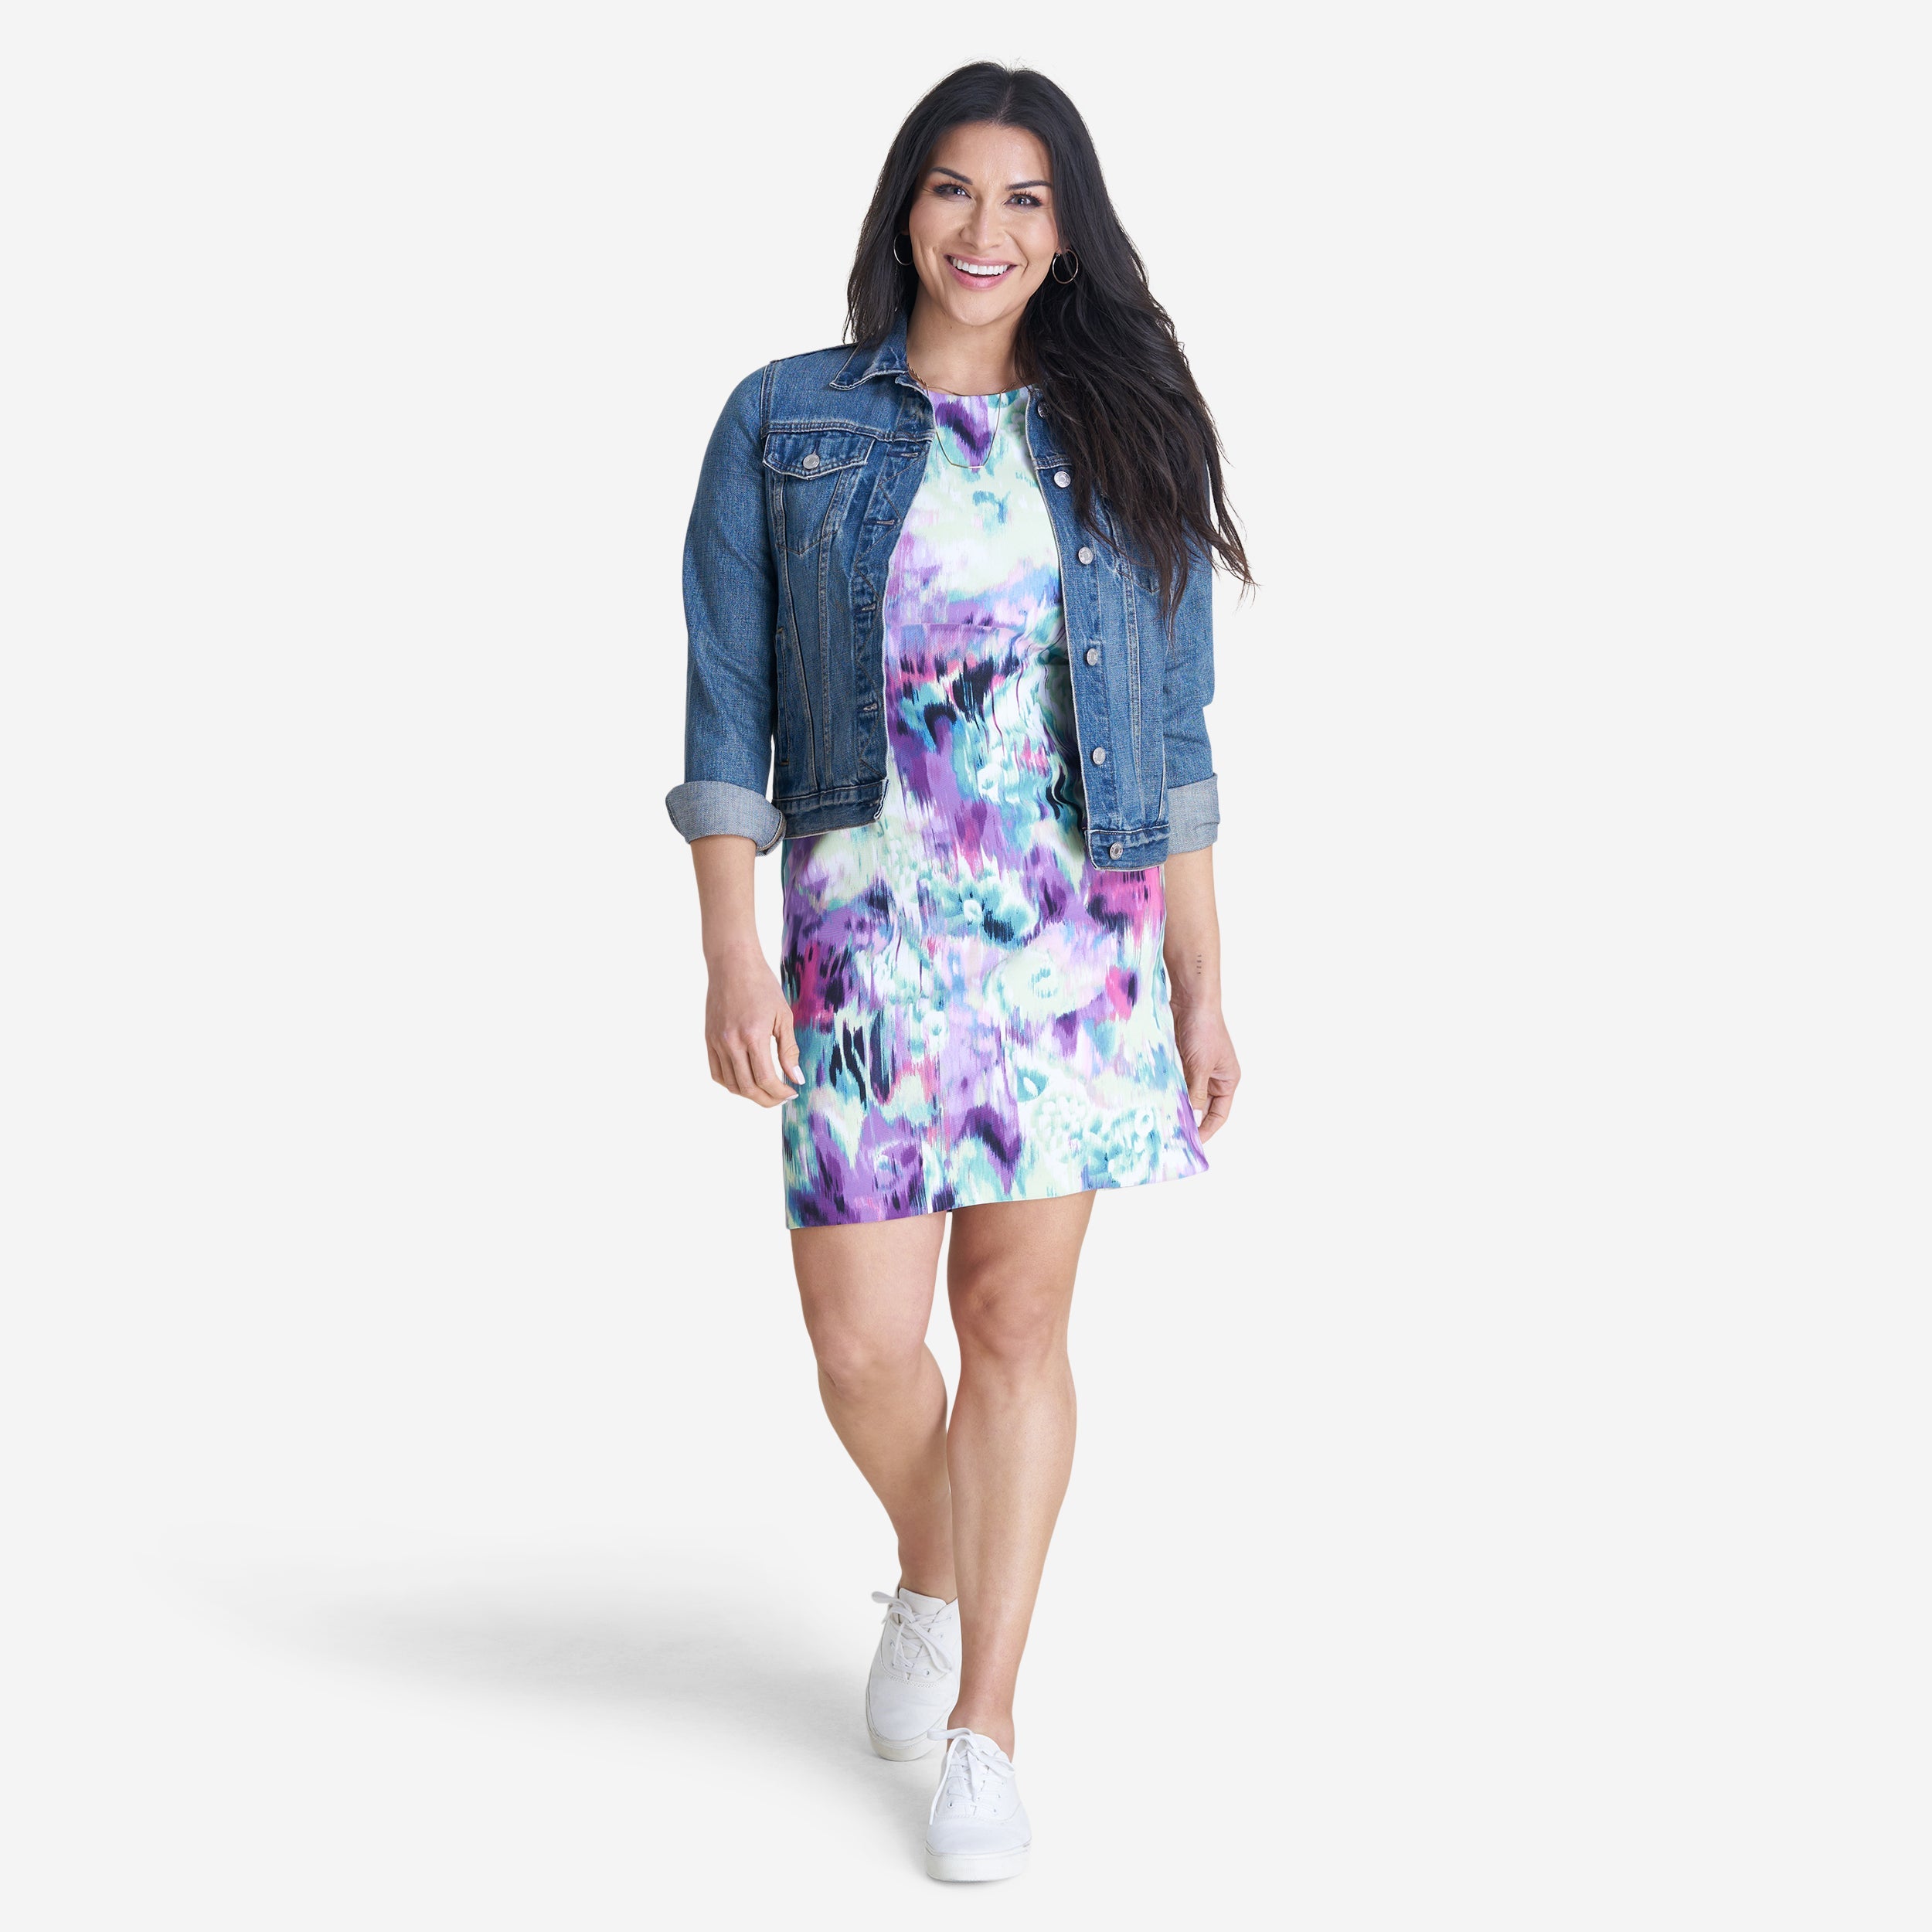 Woman posing wearing Lavender Sue Abstract Print Sheath Dress from Connected Apparel